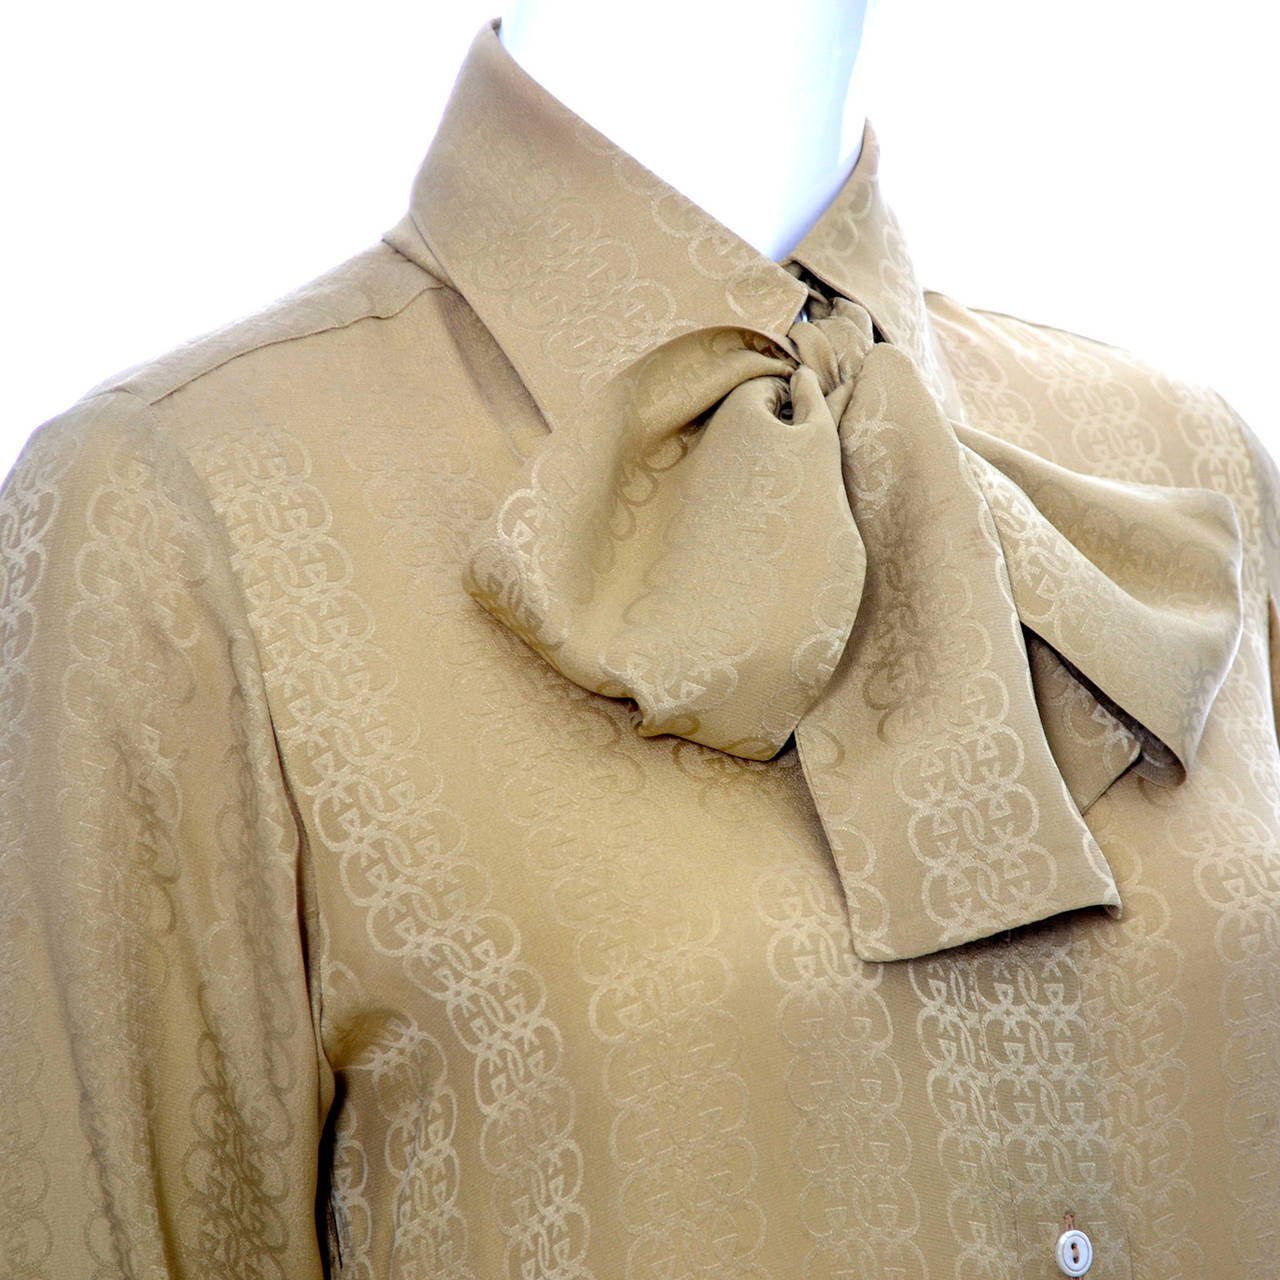 This is a lovely vintage silk blouse from Gucci made in the 1970's. Pretty gold silk logo fabric with buttons up the front and a separate sash that can be tied in a knot or a bow.  The blouse is in excellent condition and was made in Italy. I would